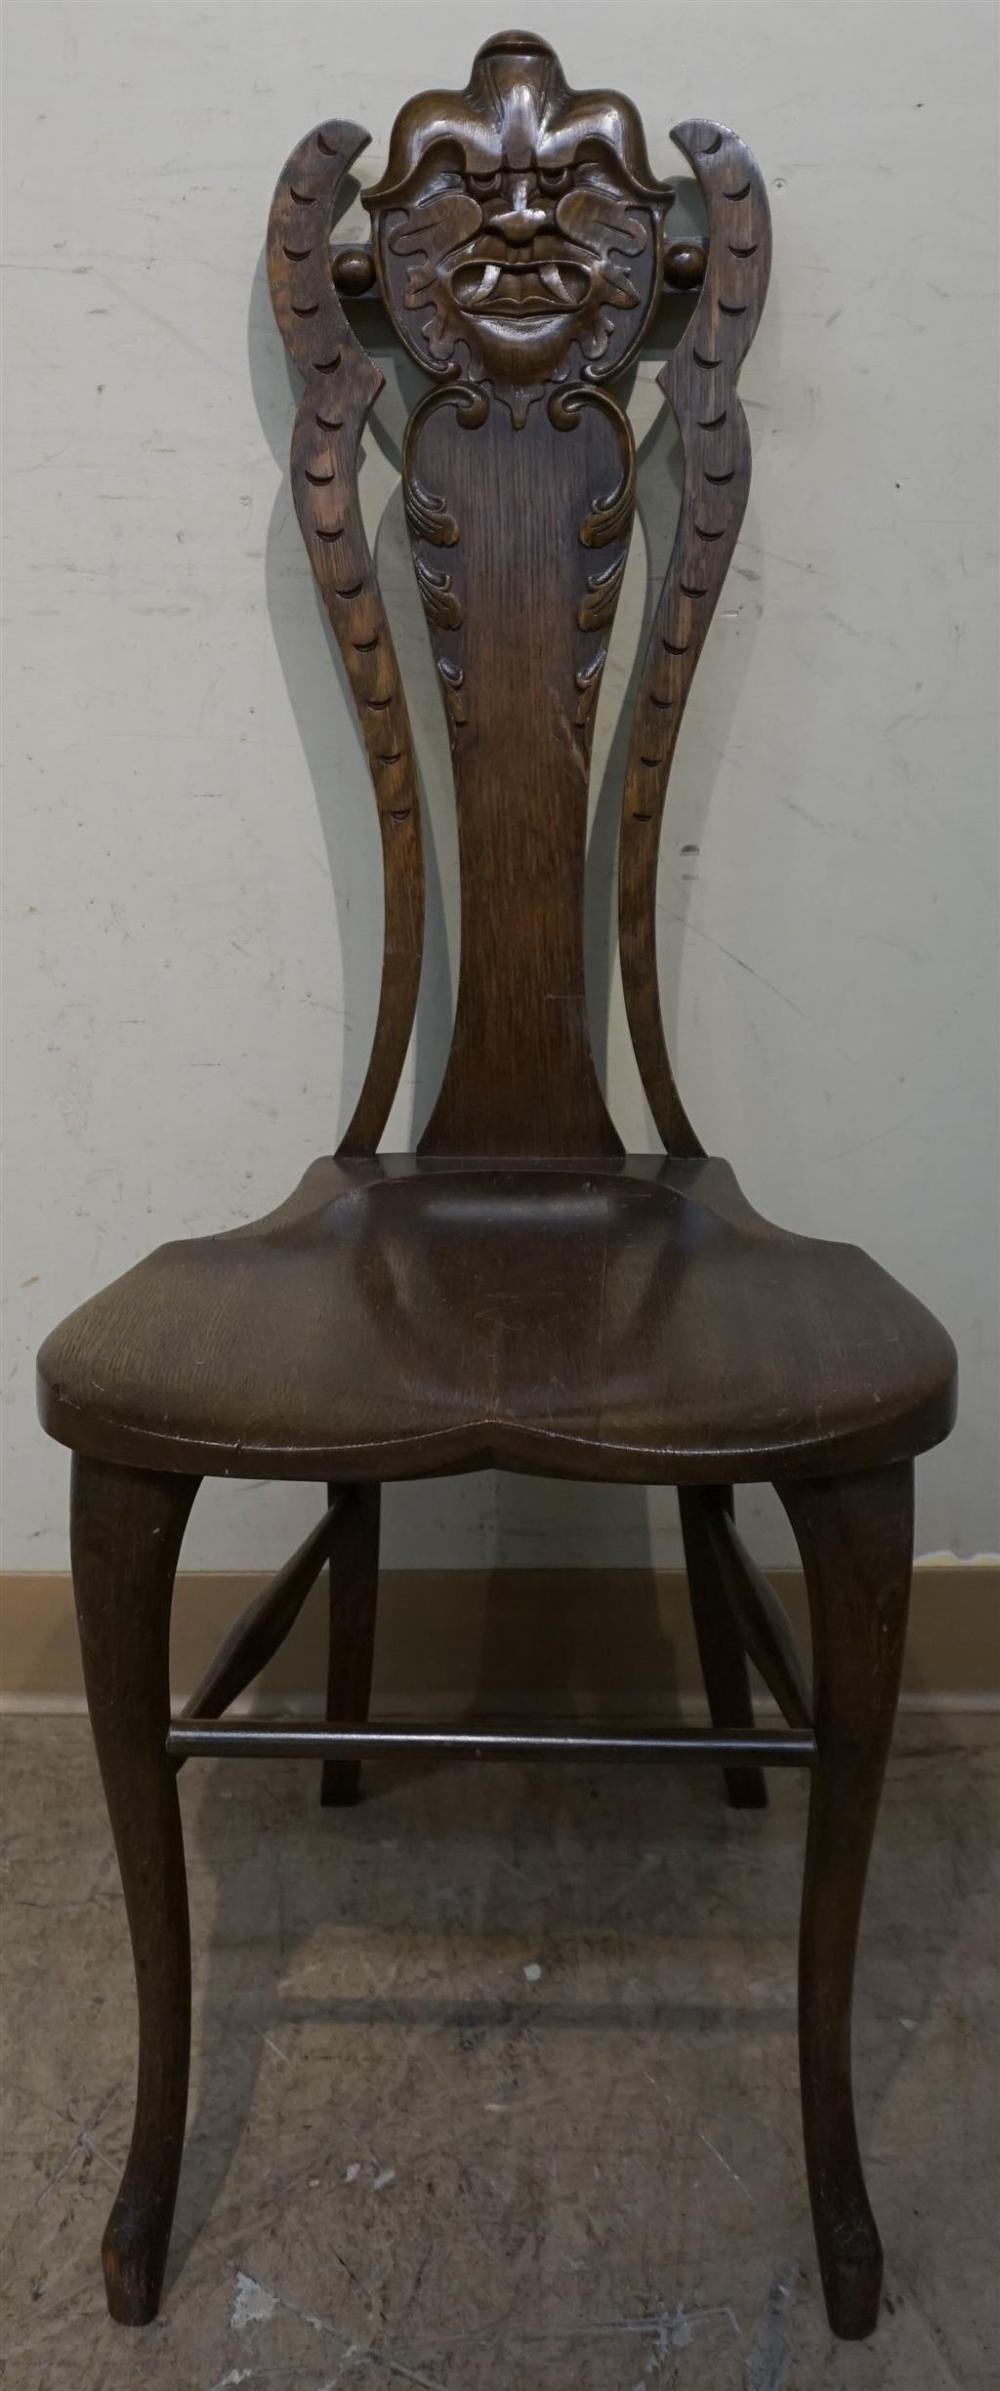 MICHIGAN CHAIR COMPANY CARVED FACE OAK